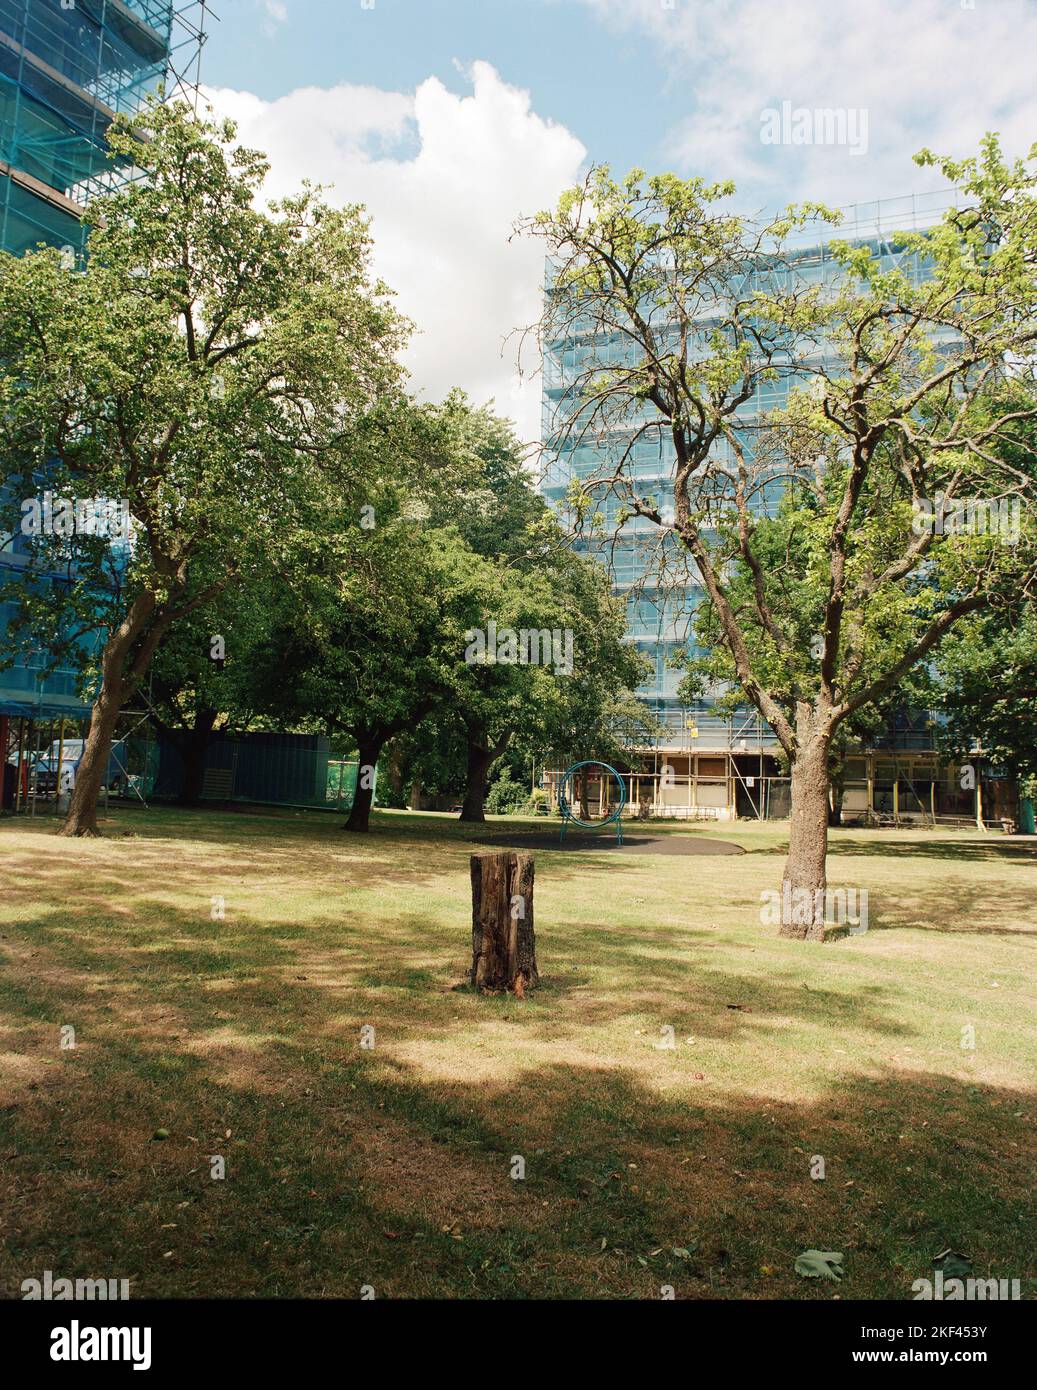 A tree stump in an open green space in lewisham where high-rise social housing is being redeveloped. Stock Photo